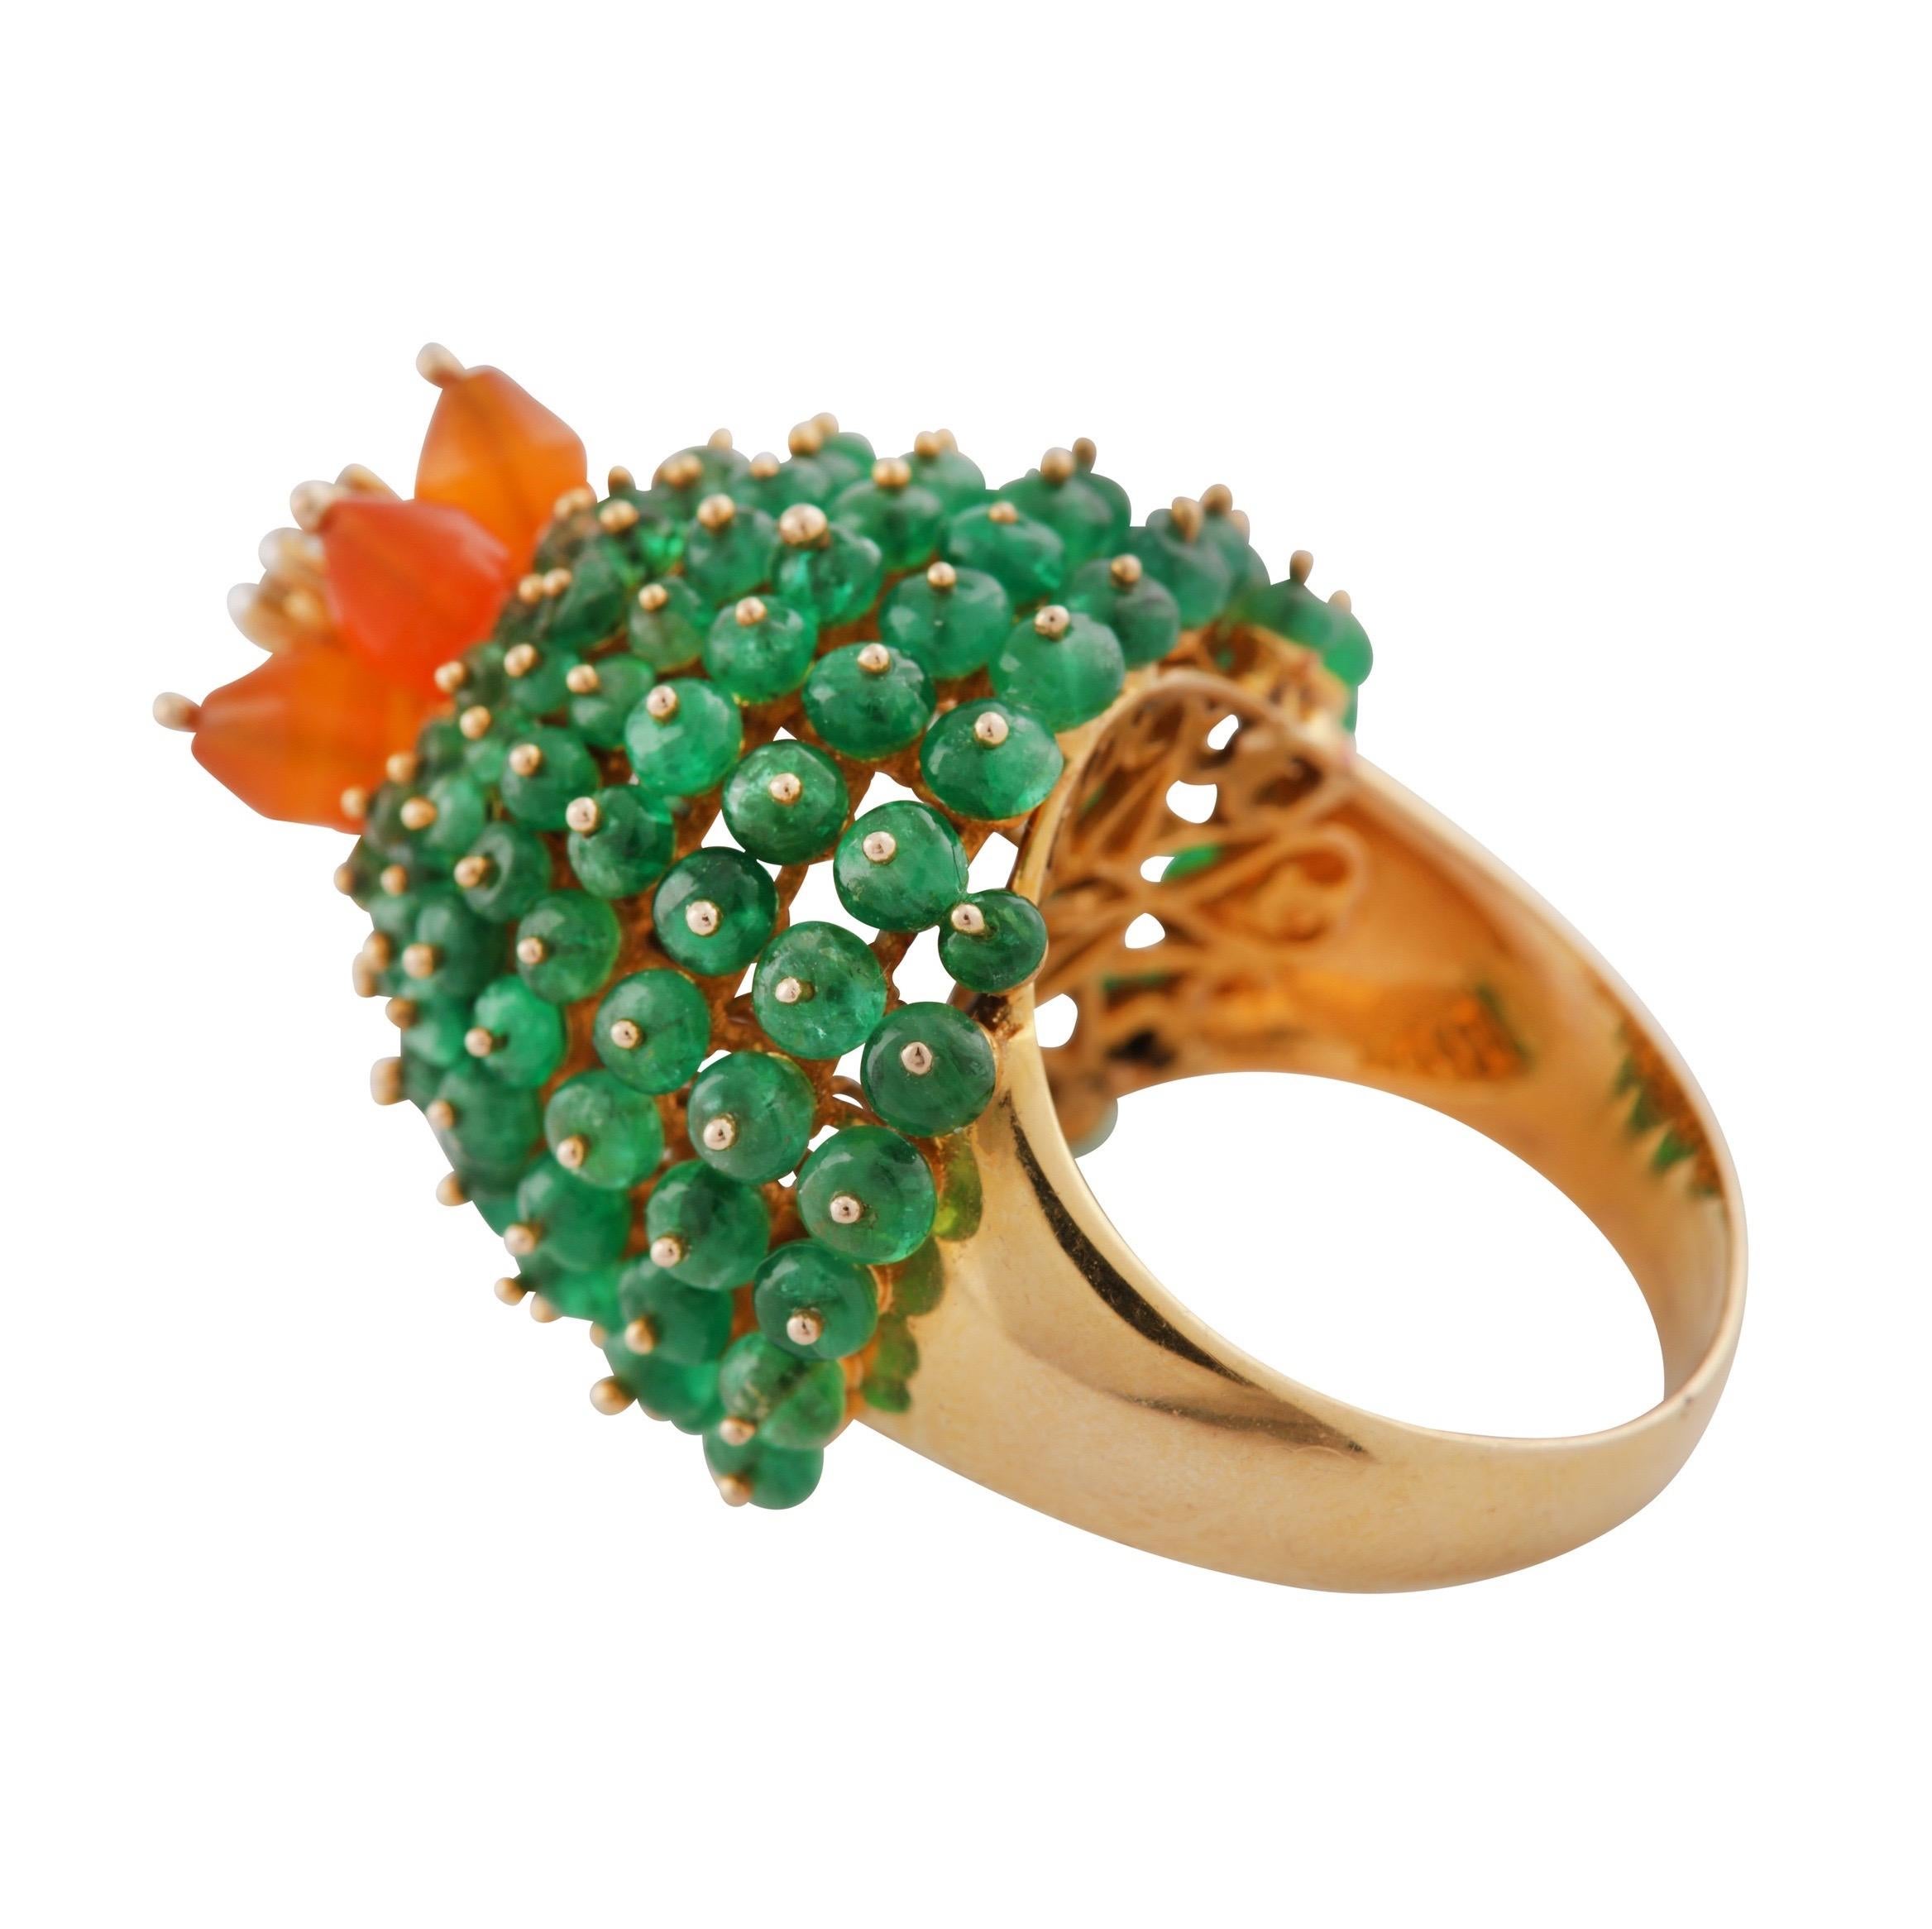 Vintage Emerald Fire Opal Diamond Bombe Cactus Cocktail Ring Yellow Gold 1990s 7